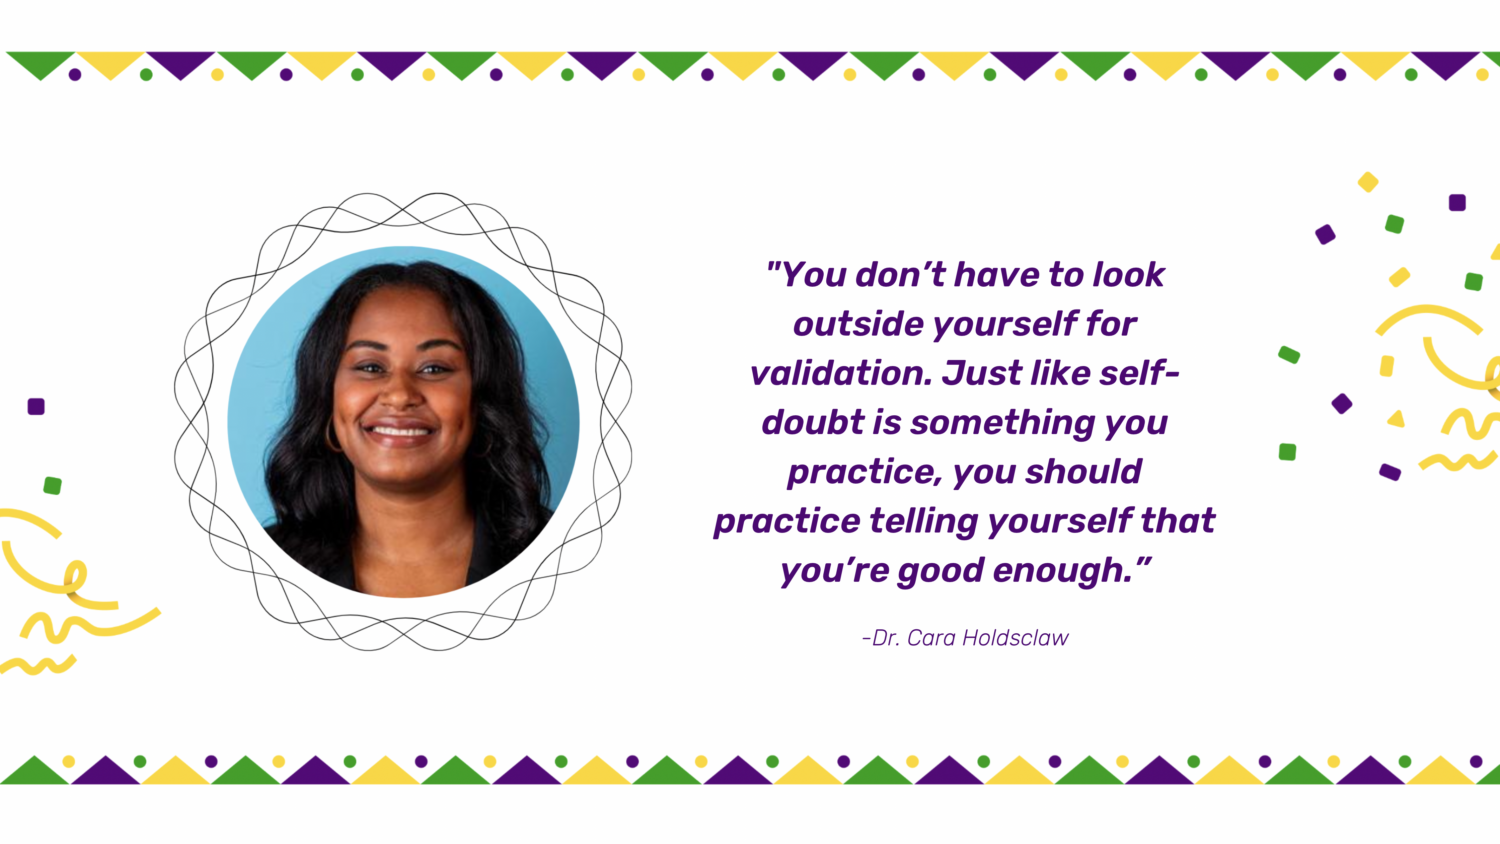 Women's History Month Series: Dr. Cara Holdsclaw